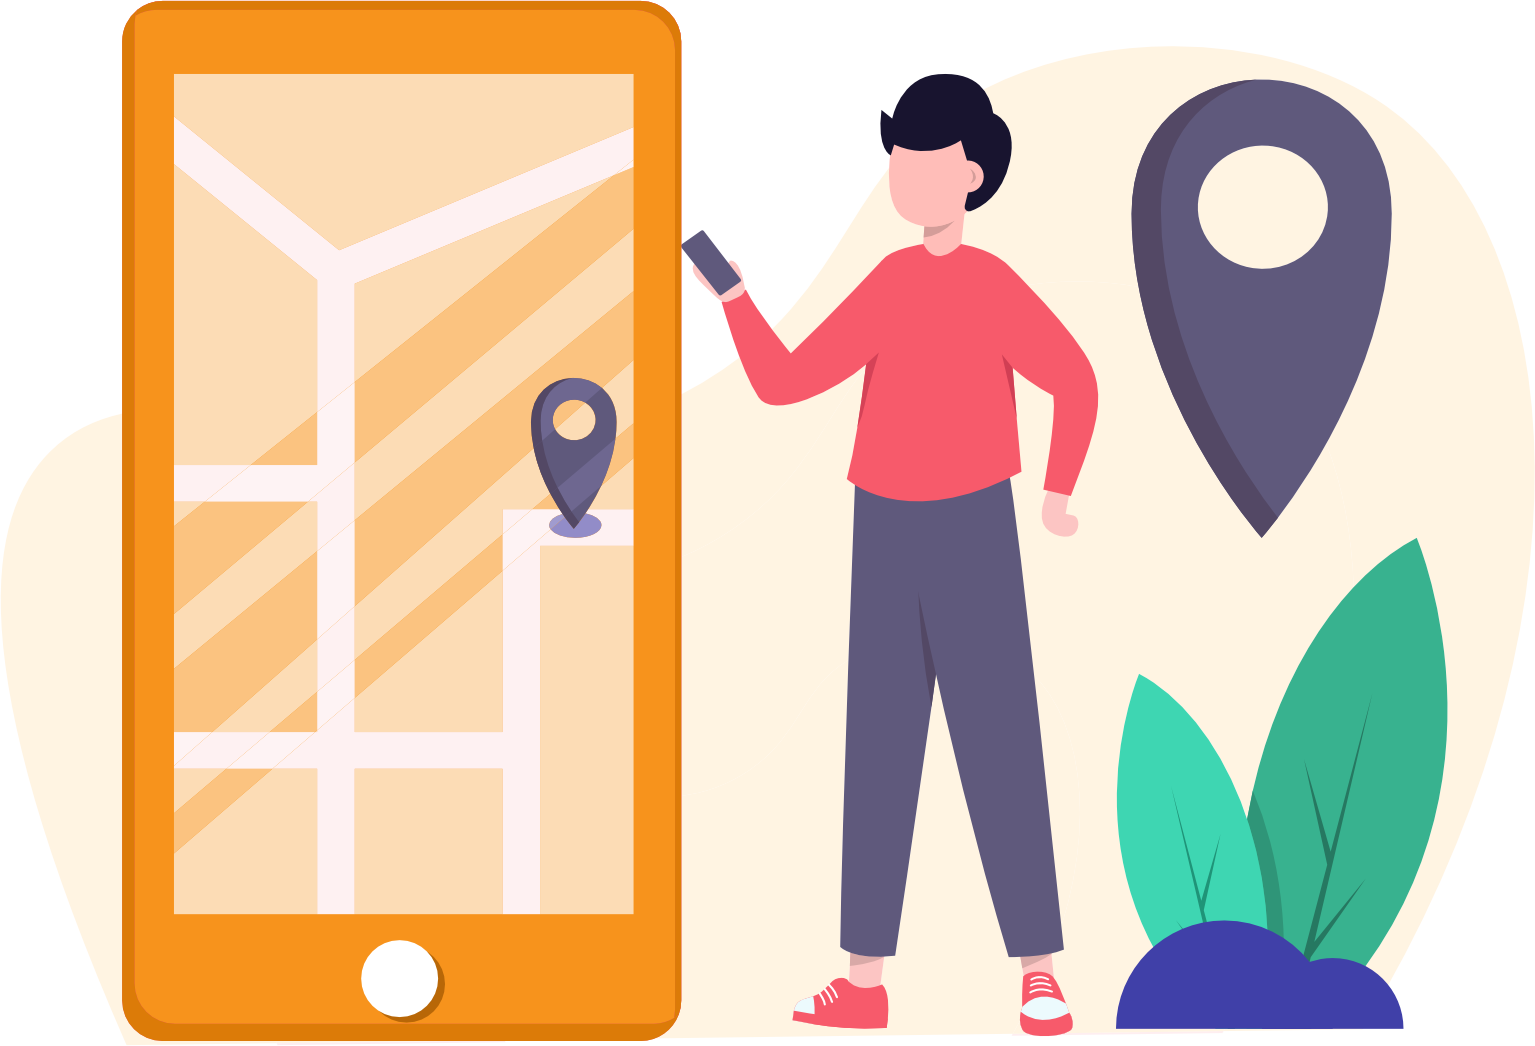 Graphic illustration of woman holding smart phone with an enlarged phone beside her pinpointing street location.